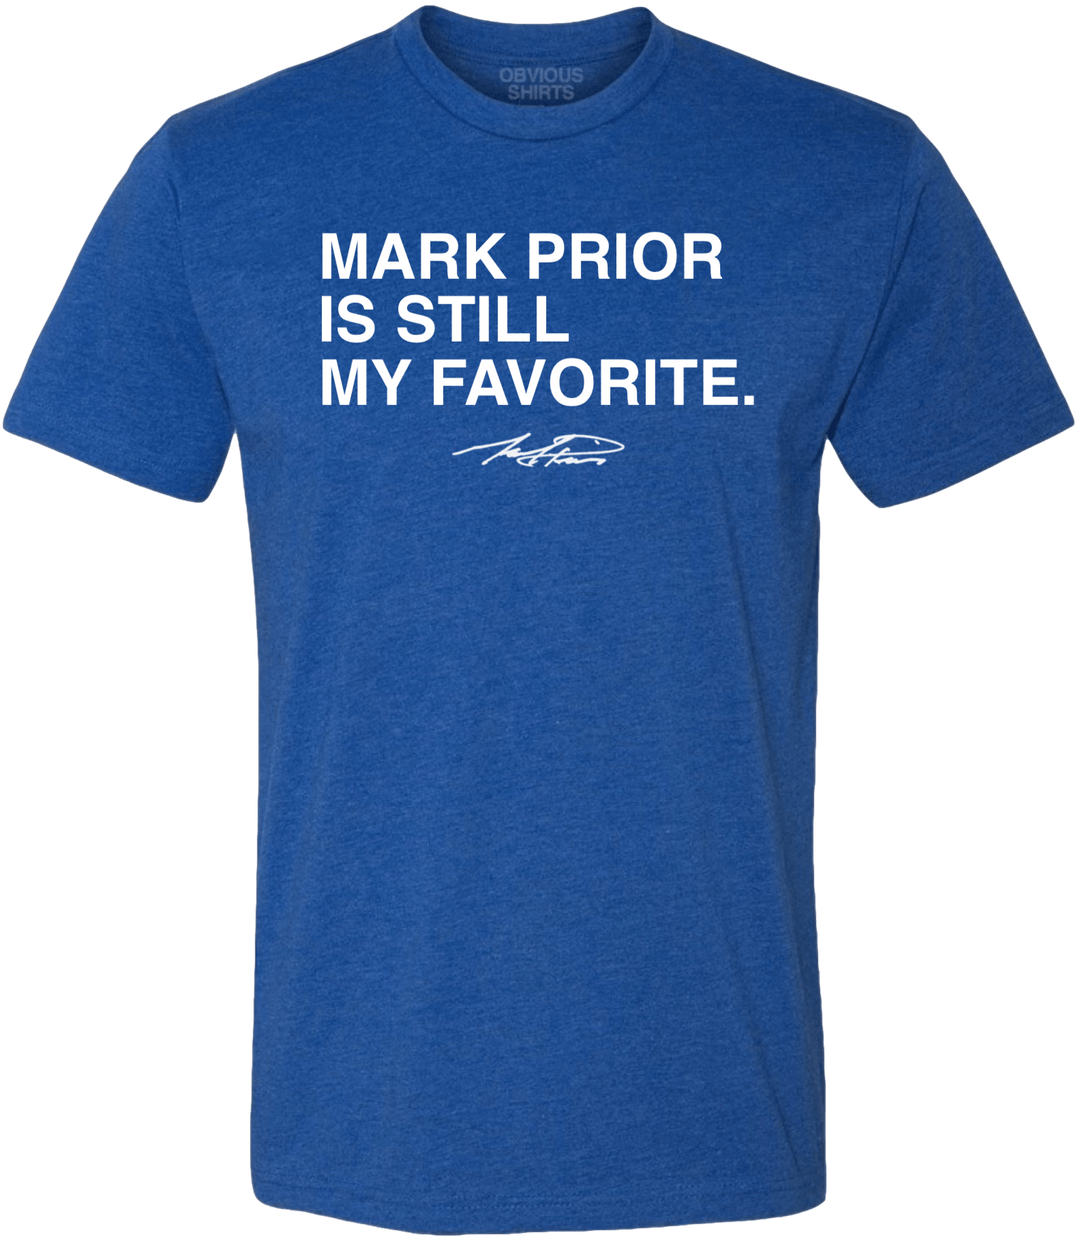 MARK PRIOR IS STILL MY FAVORITE. - OBVIOUS SHIRTS.